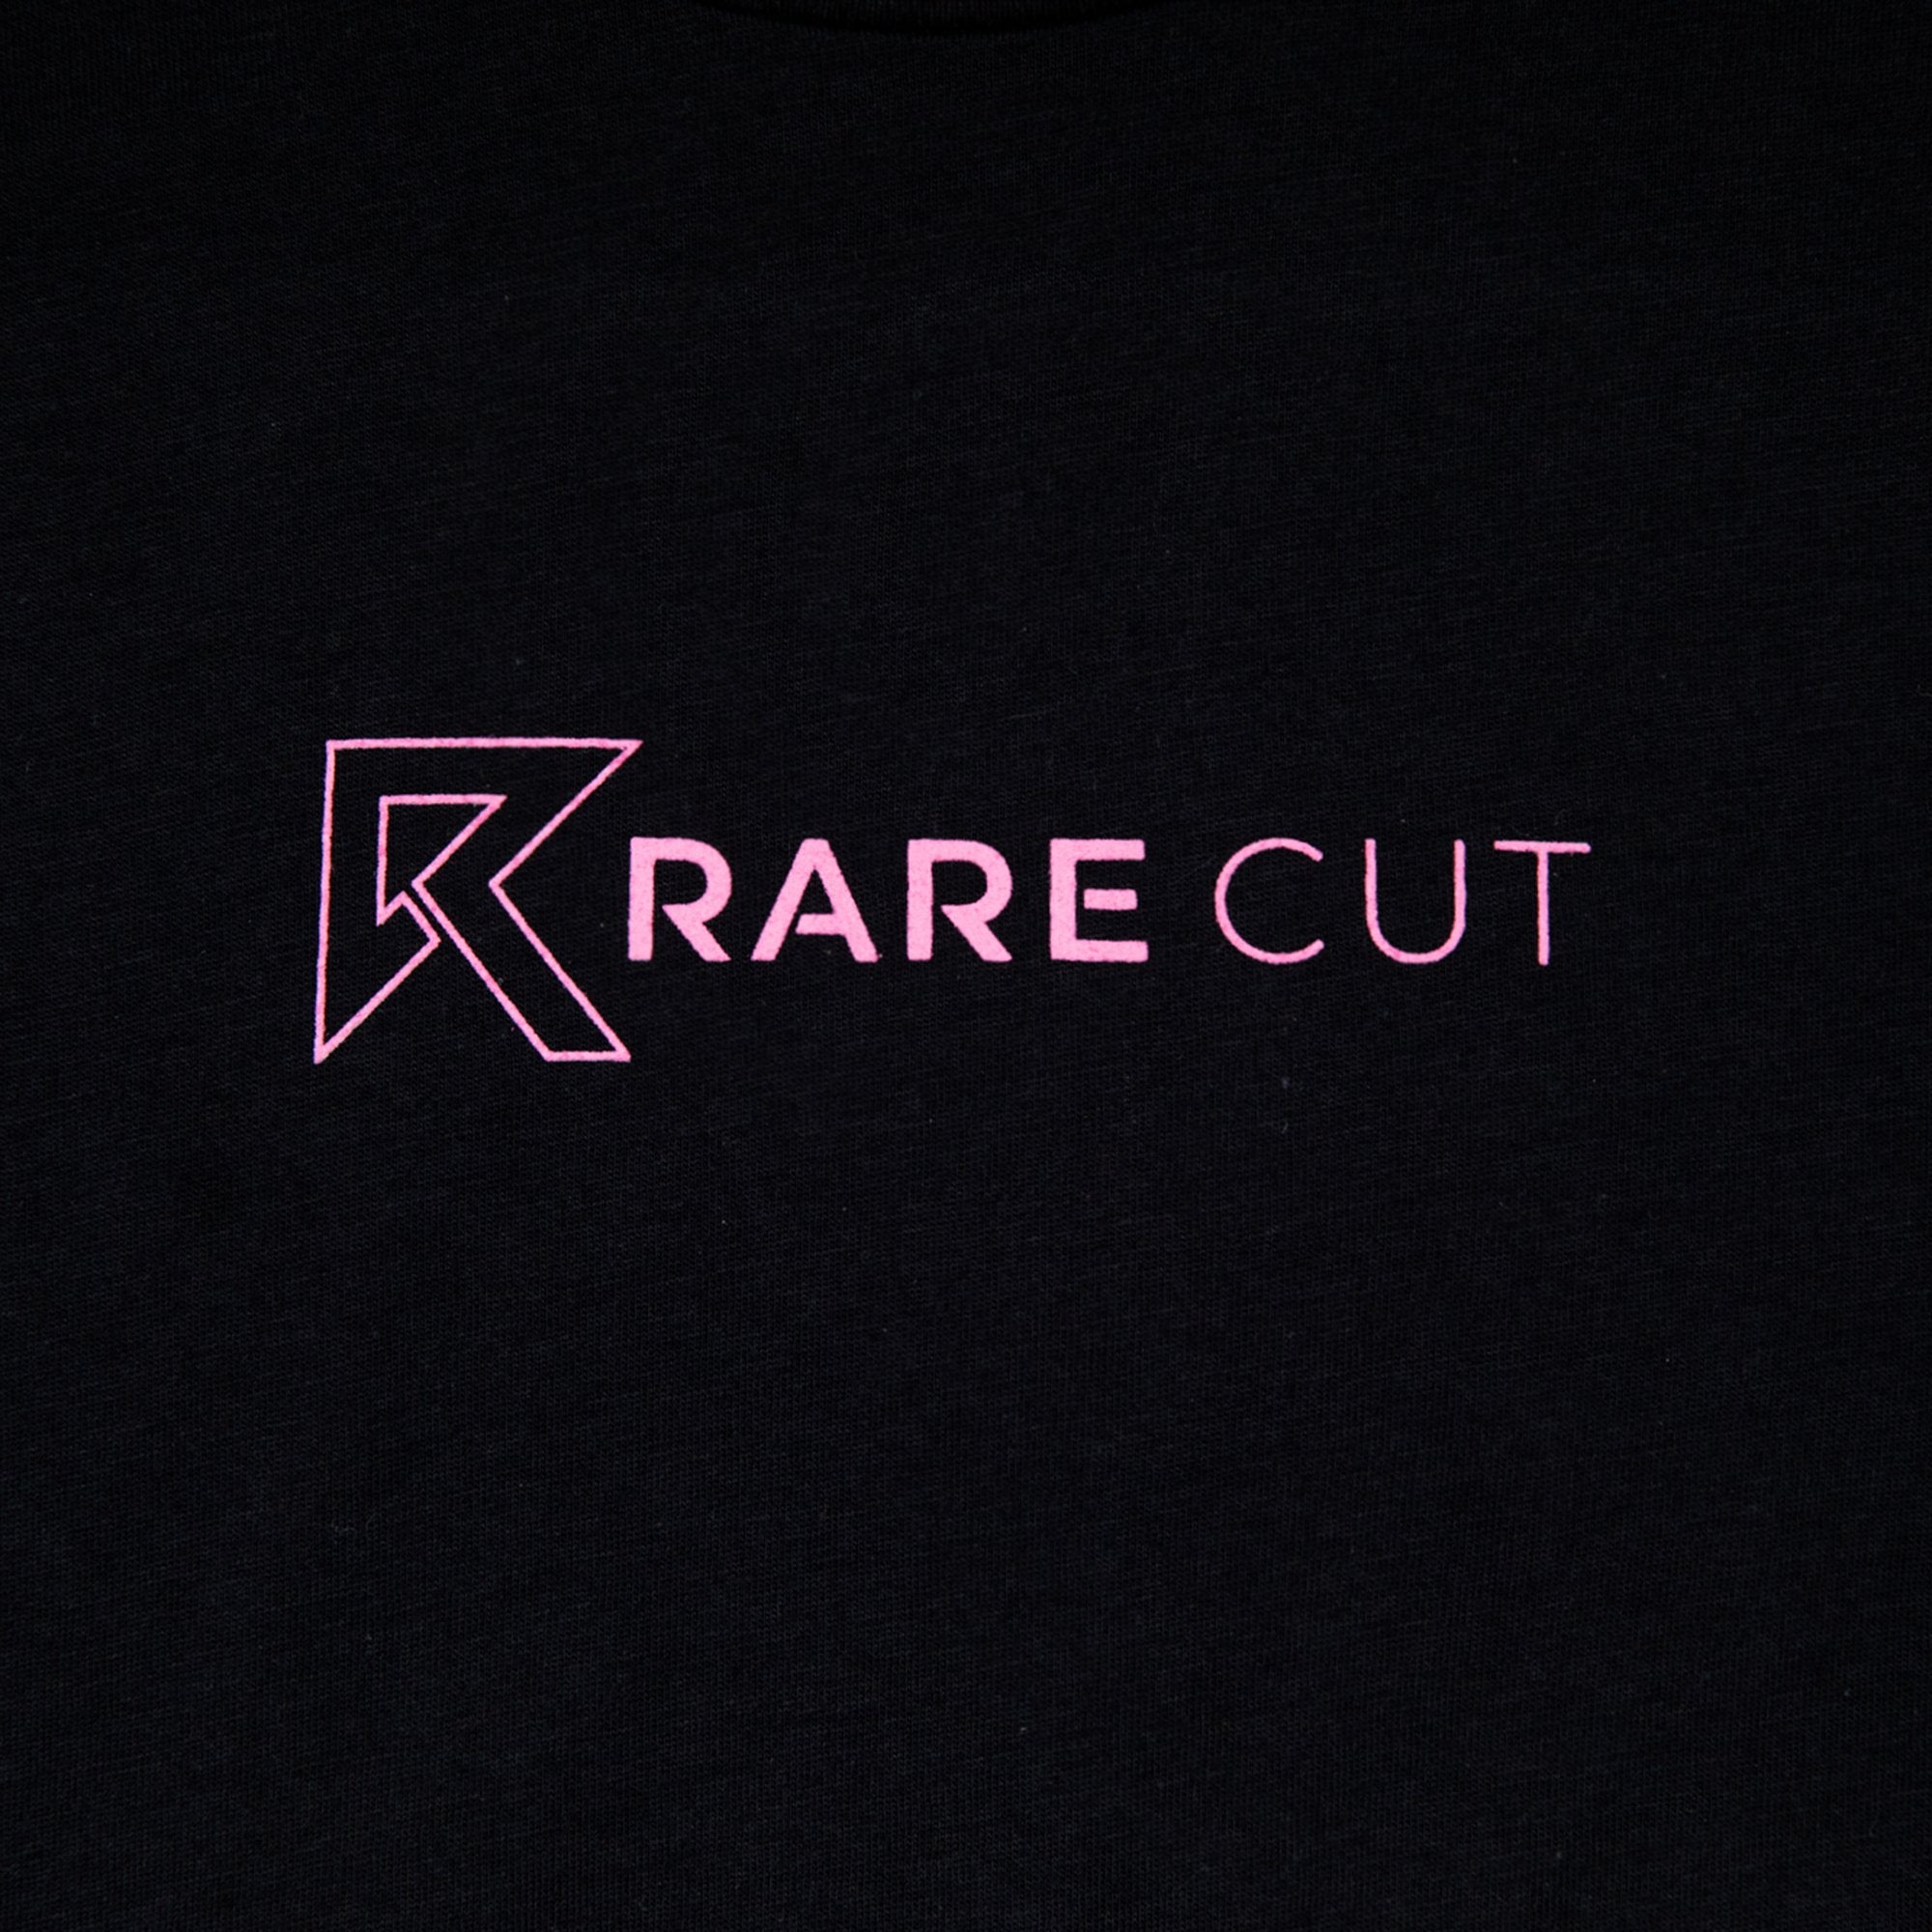 Breast Cancer Awareness Limited Edition T-Shirt RARE CUT 